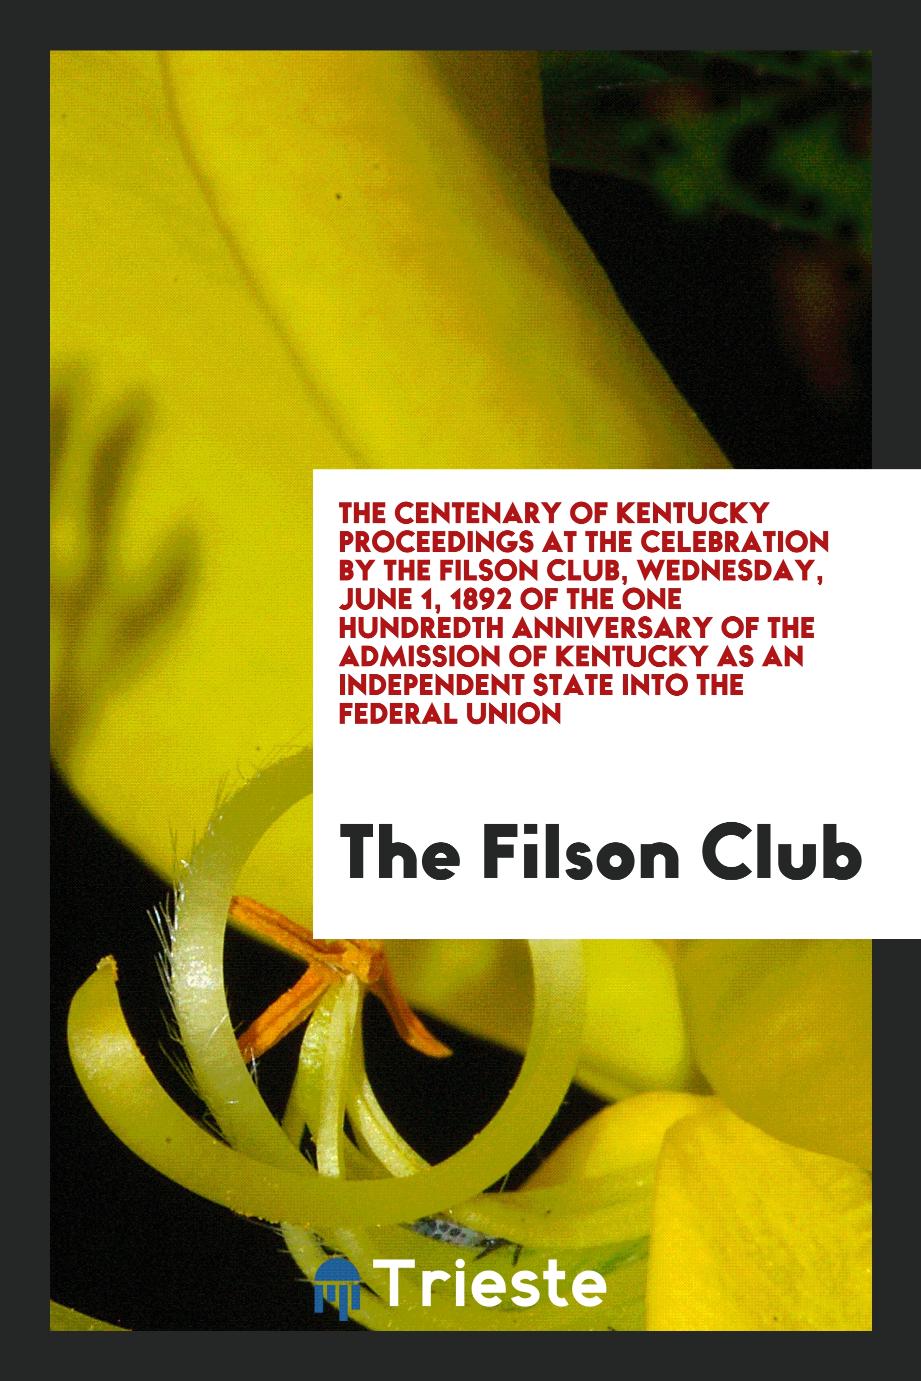 The Centenary of Kentucky proceedings at the celebration by the Filson Club, Wednesday, June 1, 1892 of the one hundredth anniversary of the admission of Kentucky as an independent state into the Federal Union